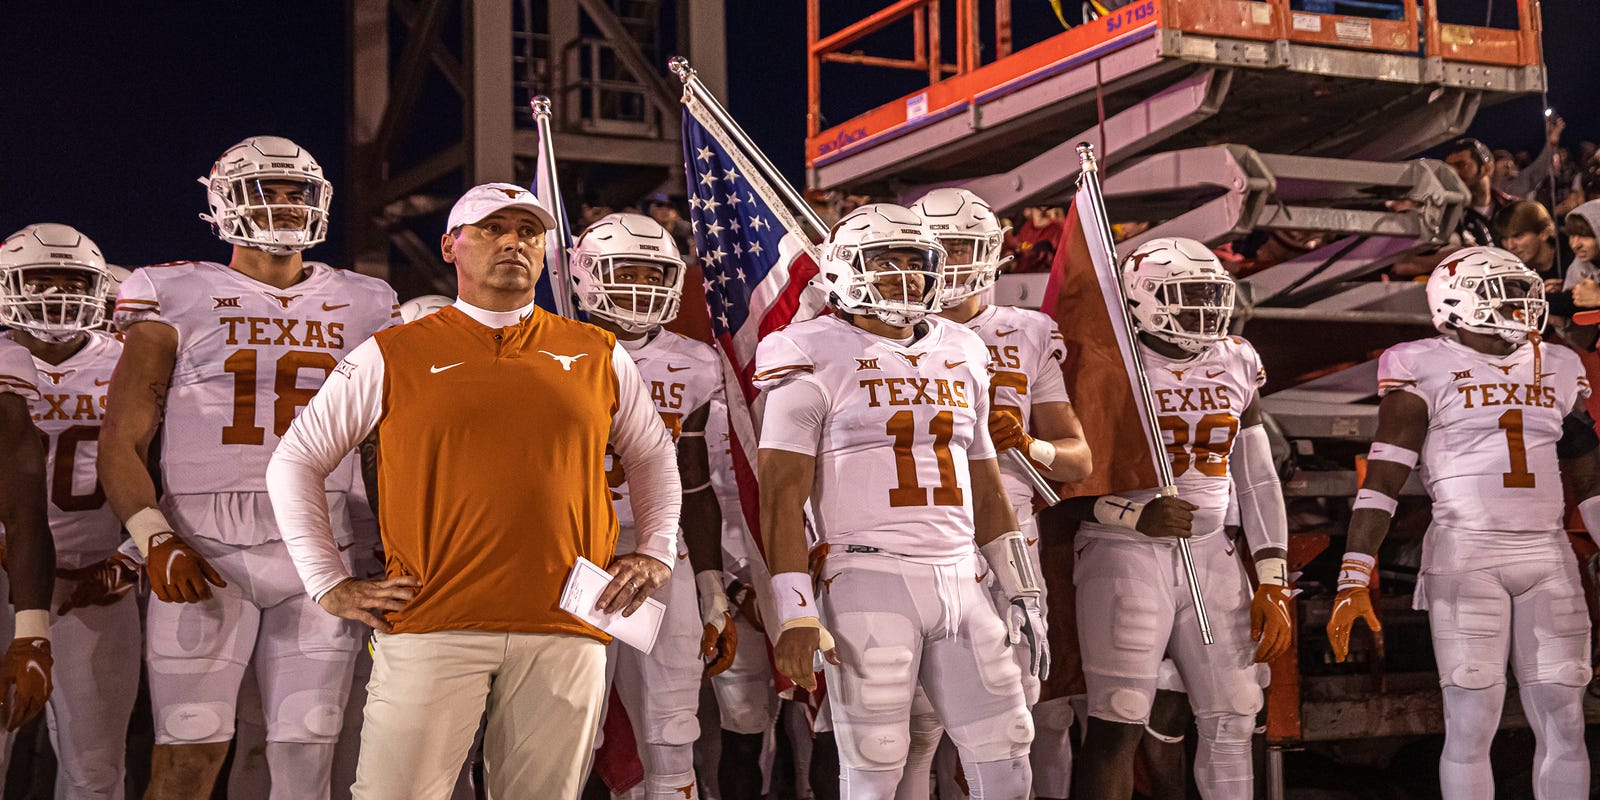 Longhorn Football Schedule 2022 Football: Big 12 Sets Dates, Locations For Texas 2022 Conference Games